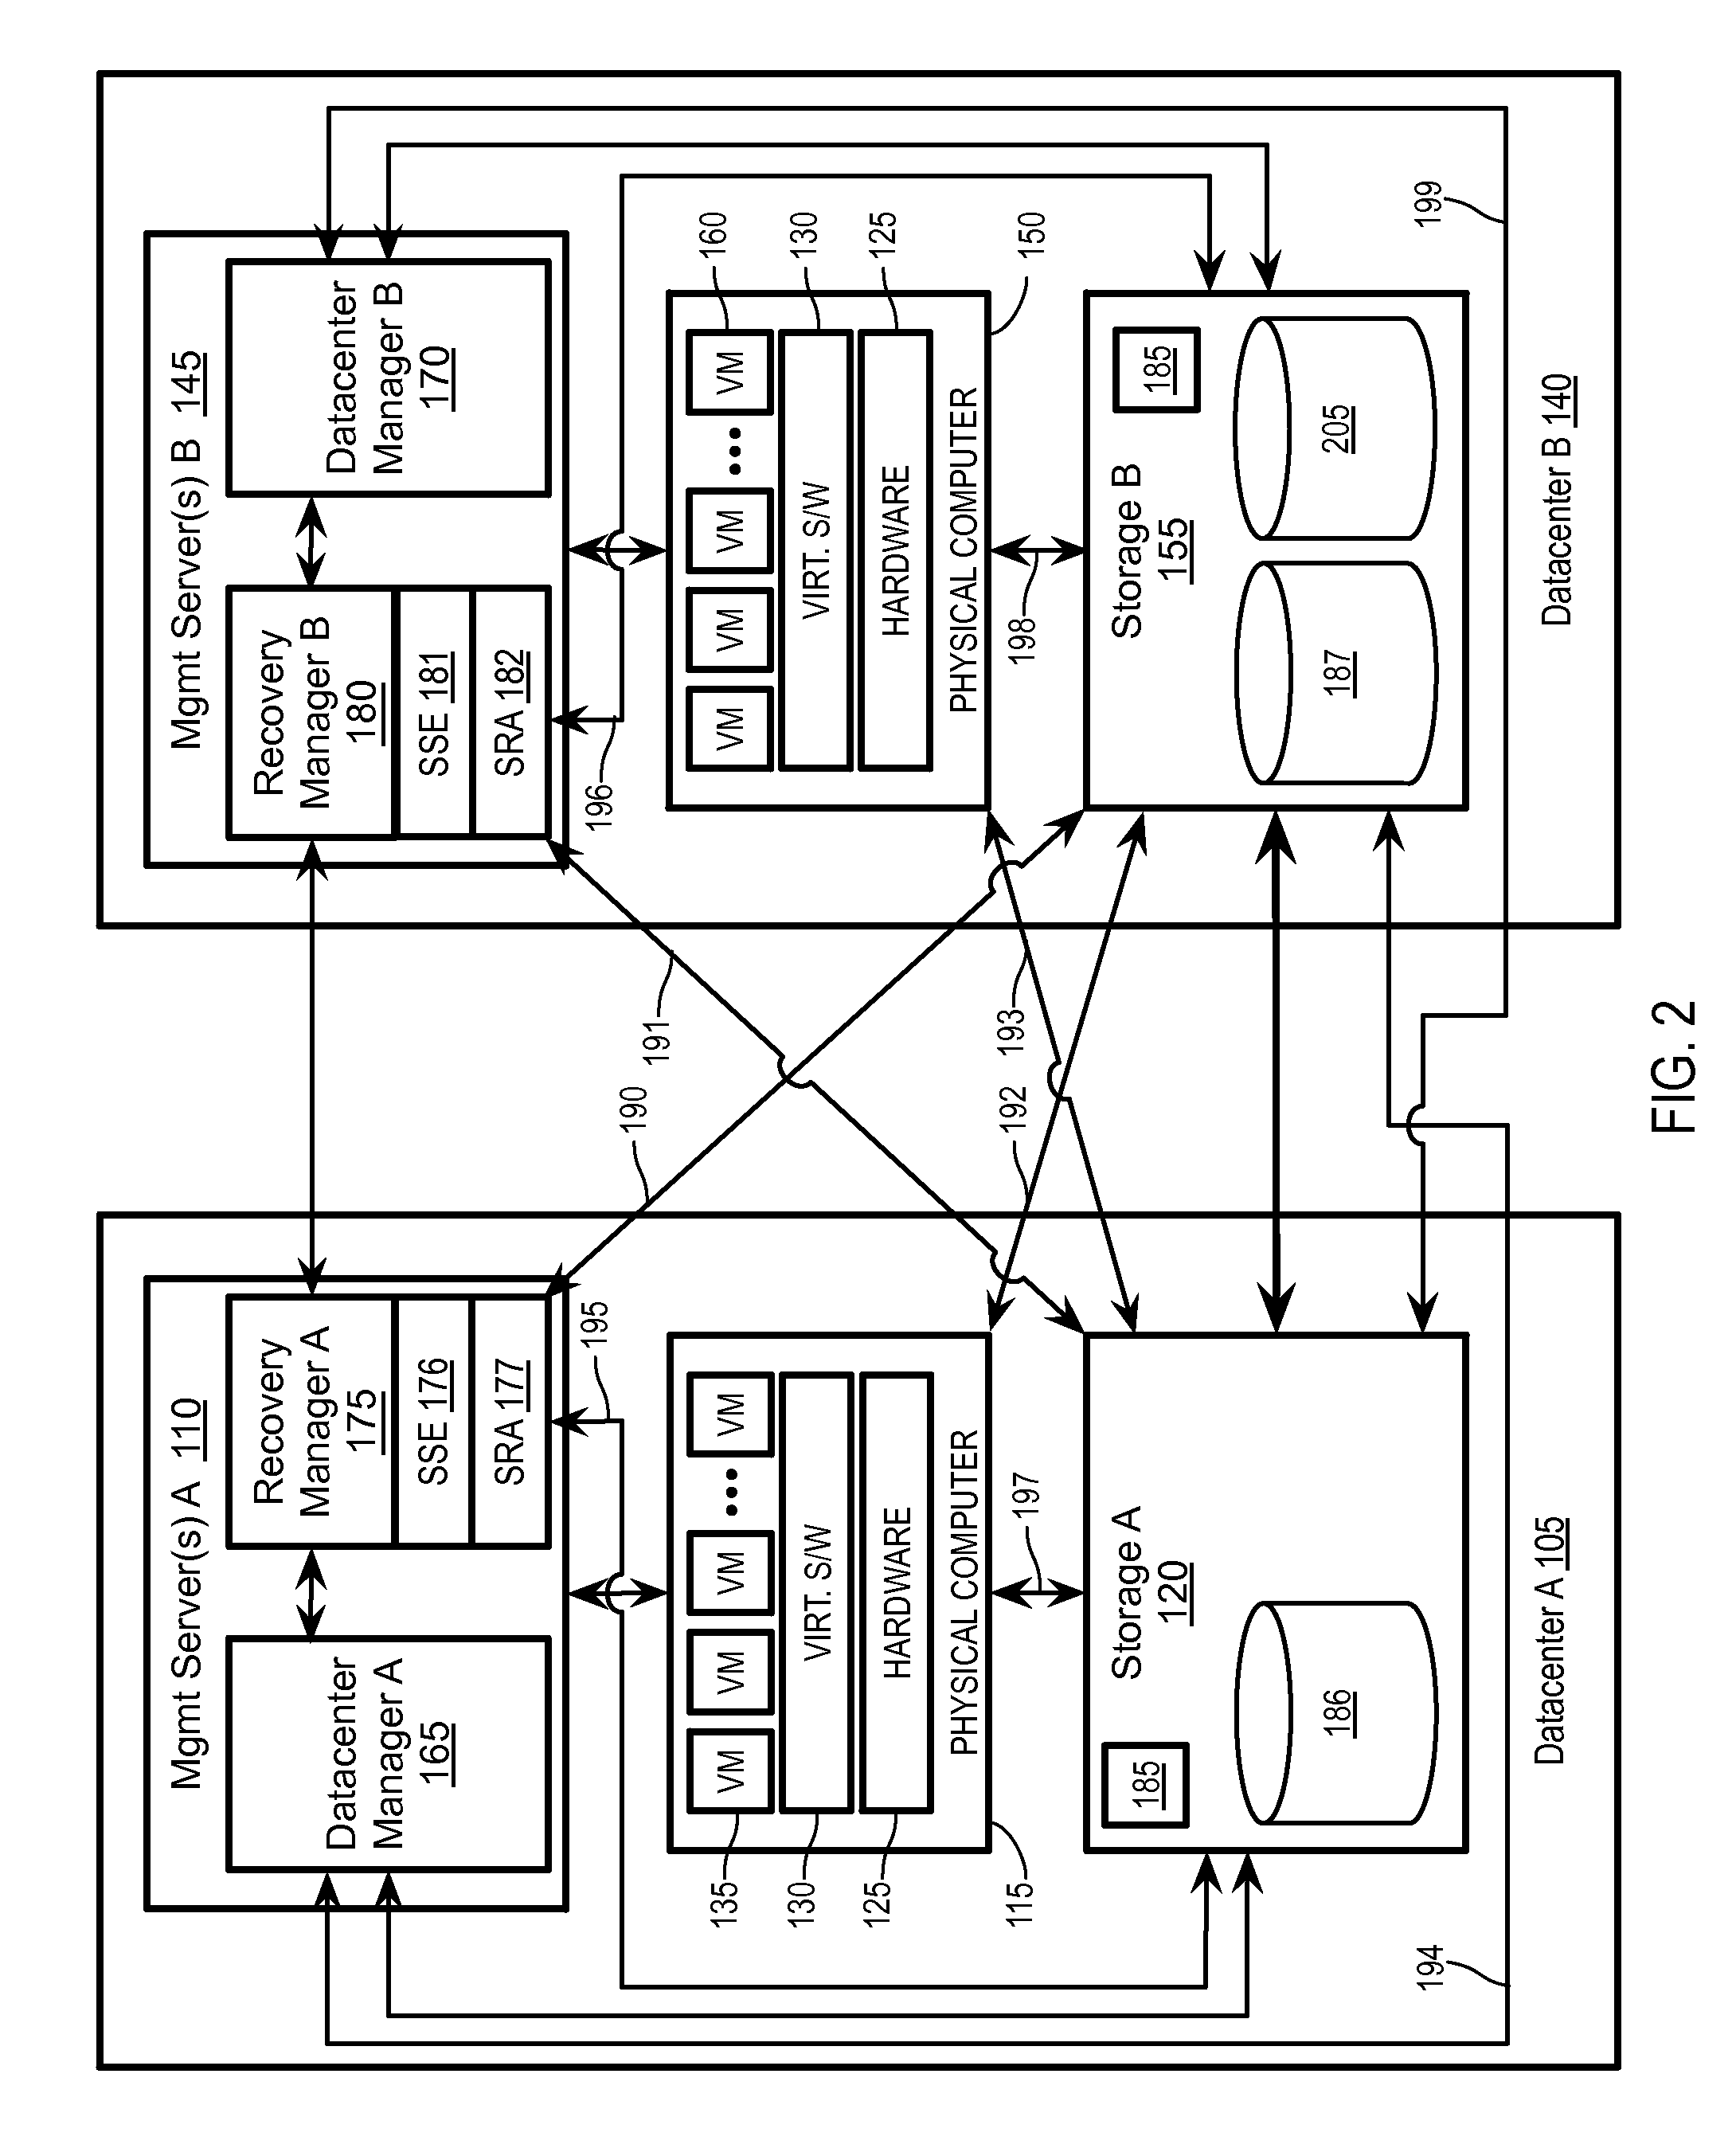 Emulating a stretched storage device using a shared storage device